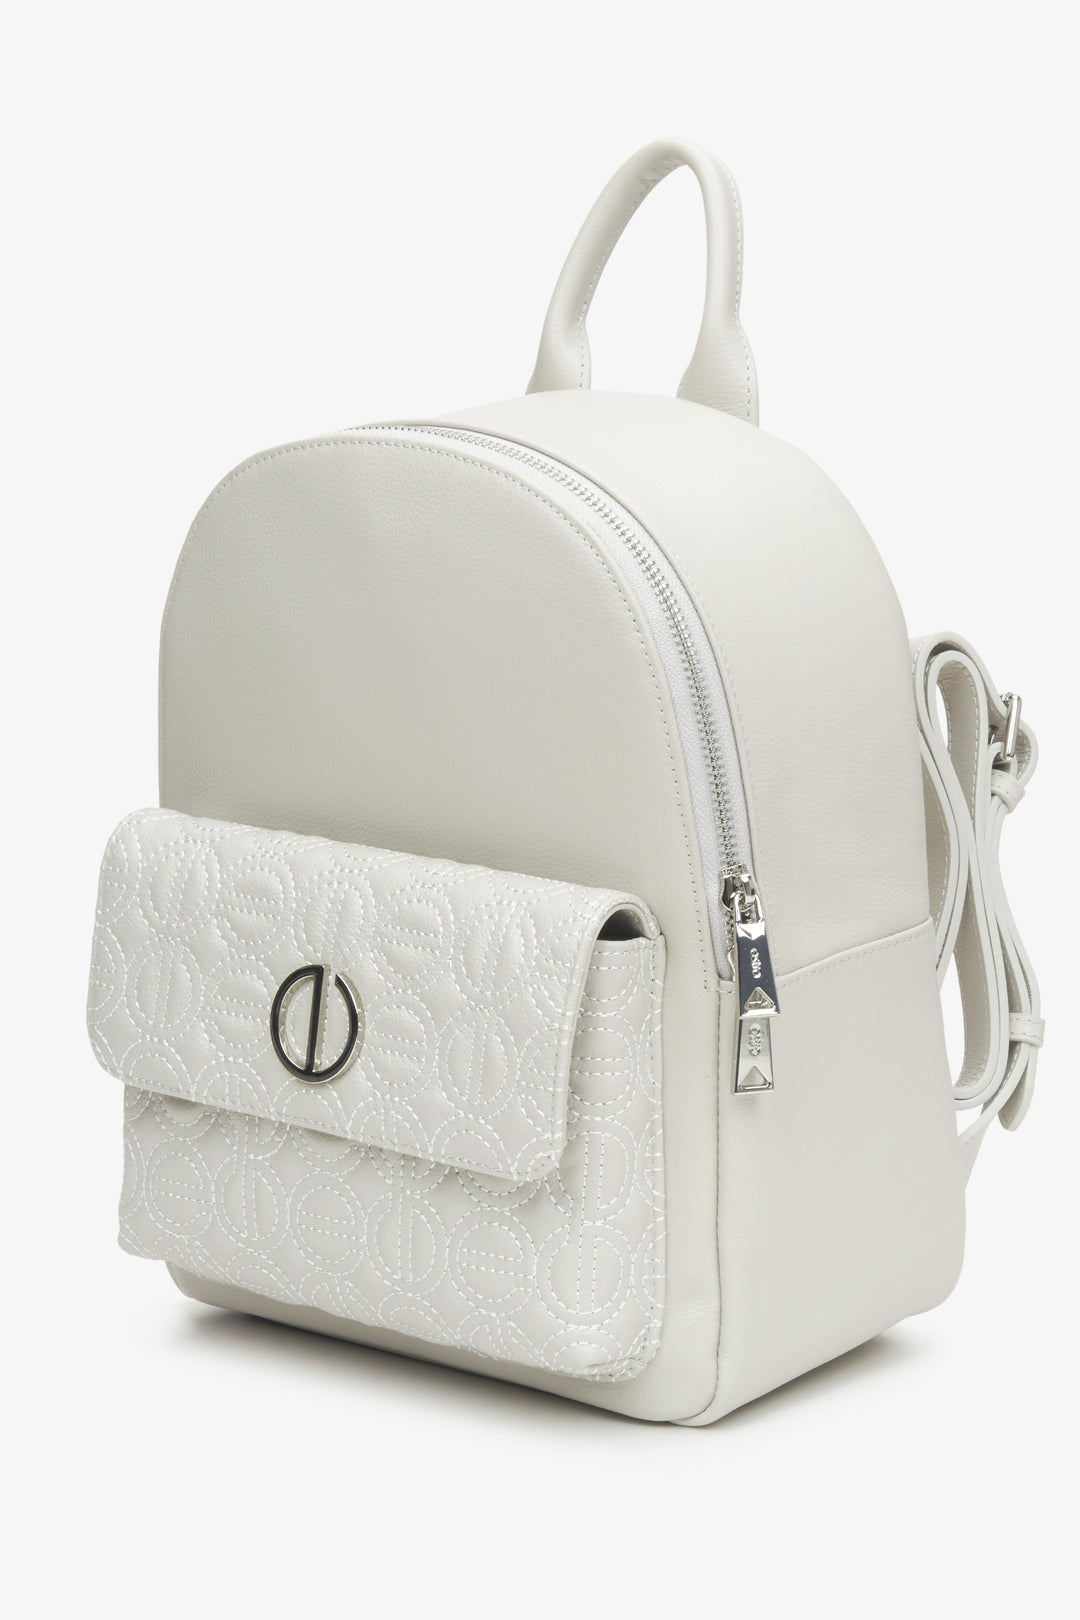 Women's light grey leather backpack with long straps by Estro.